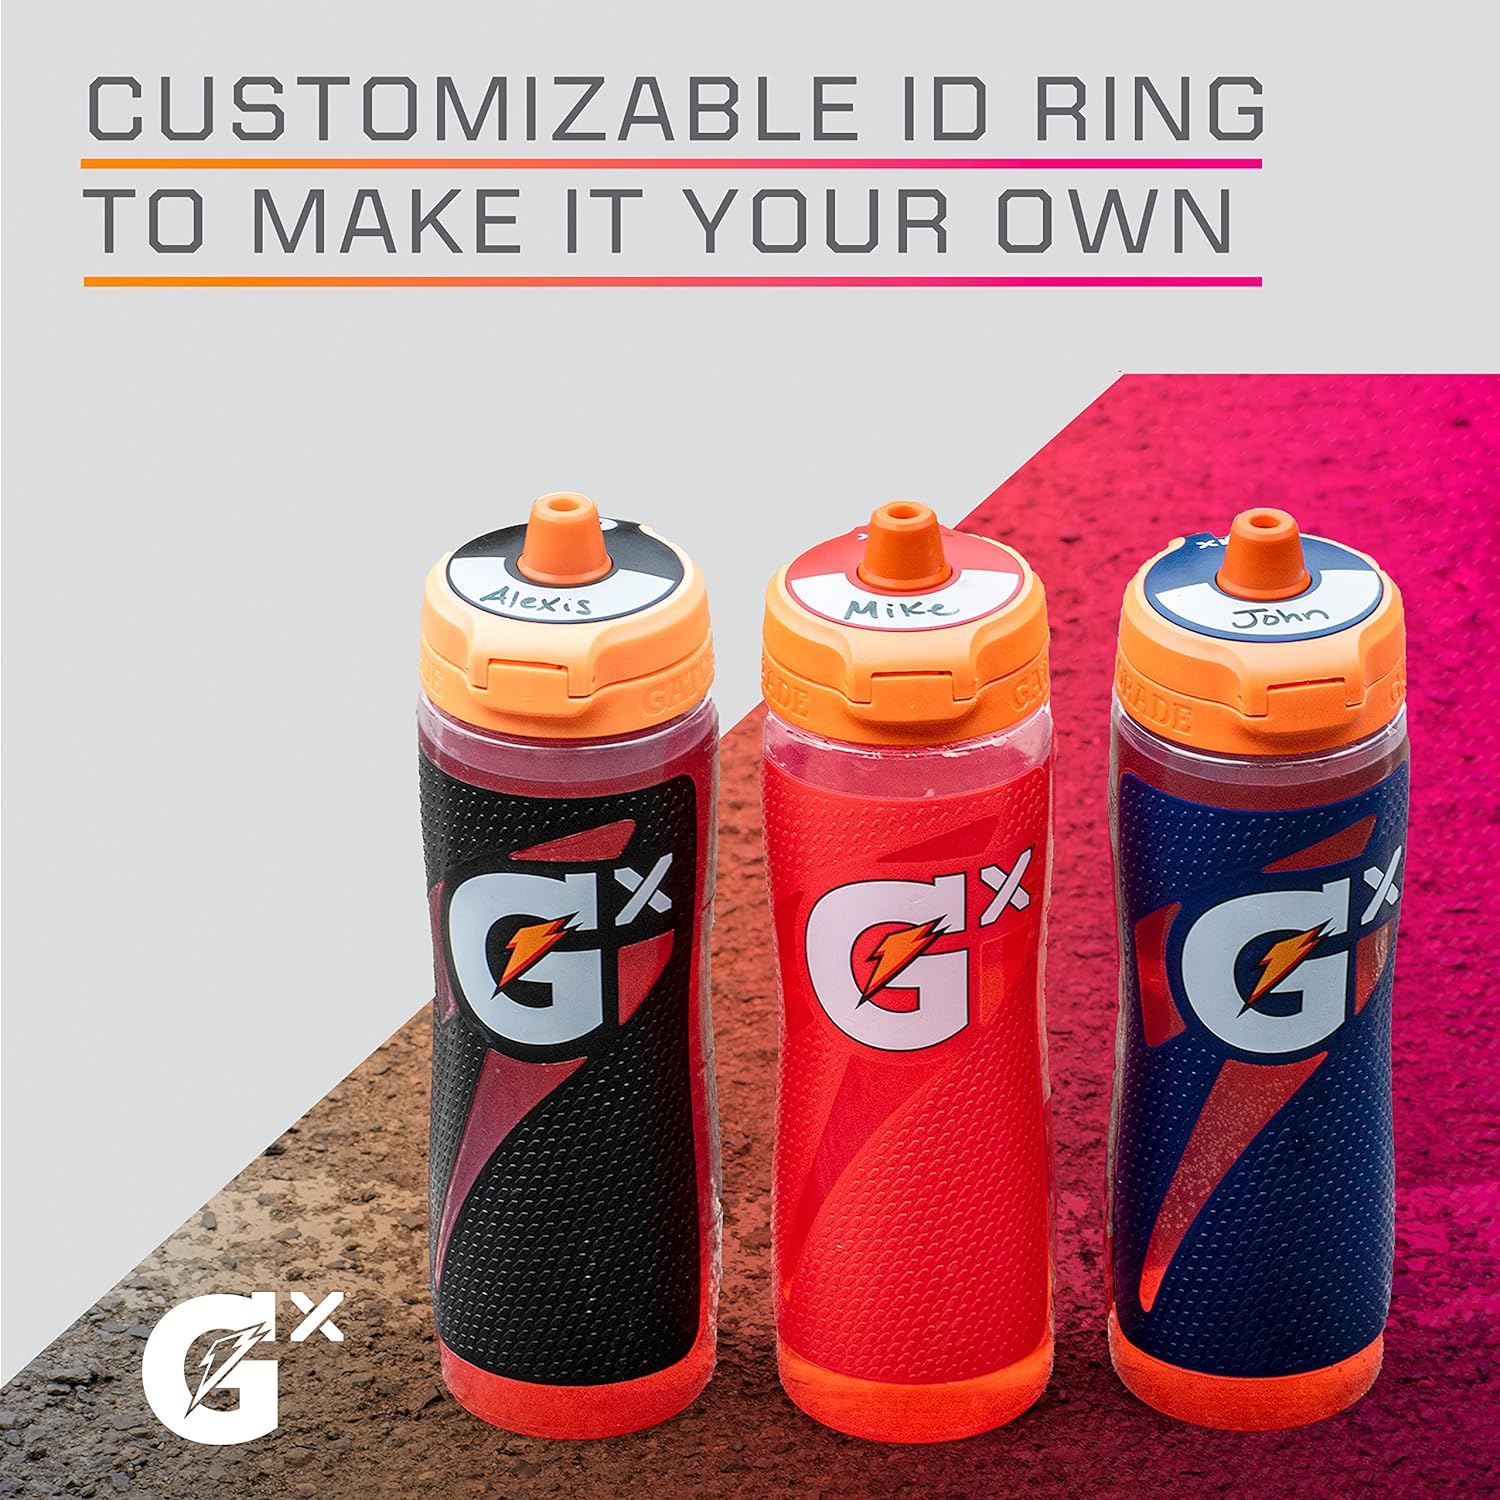 Gatorade Gx Hydration System, Non-Slip Gx Squeeze Bottles & Gx Sports Drink Concentrate Pods, Orange : Sports & Outdoors